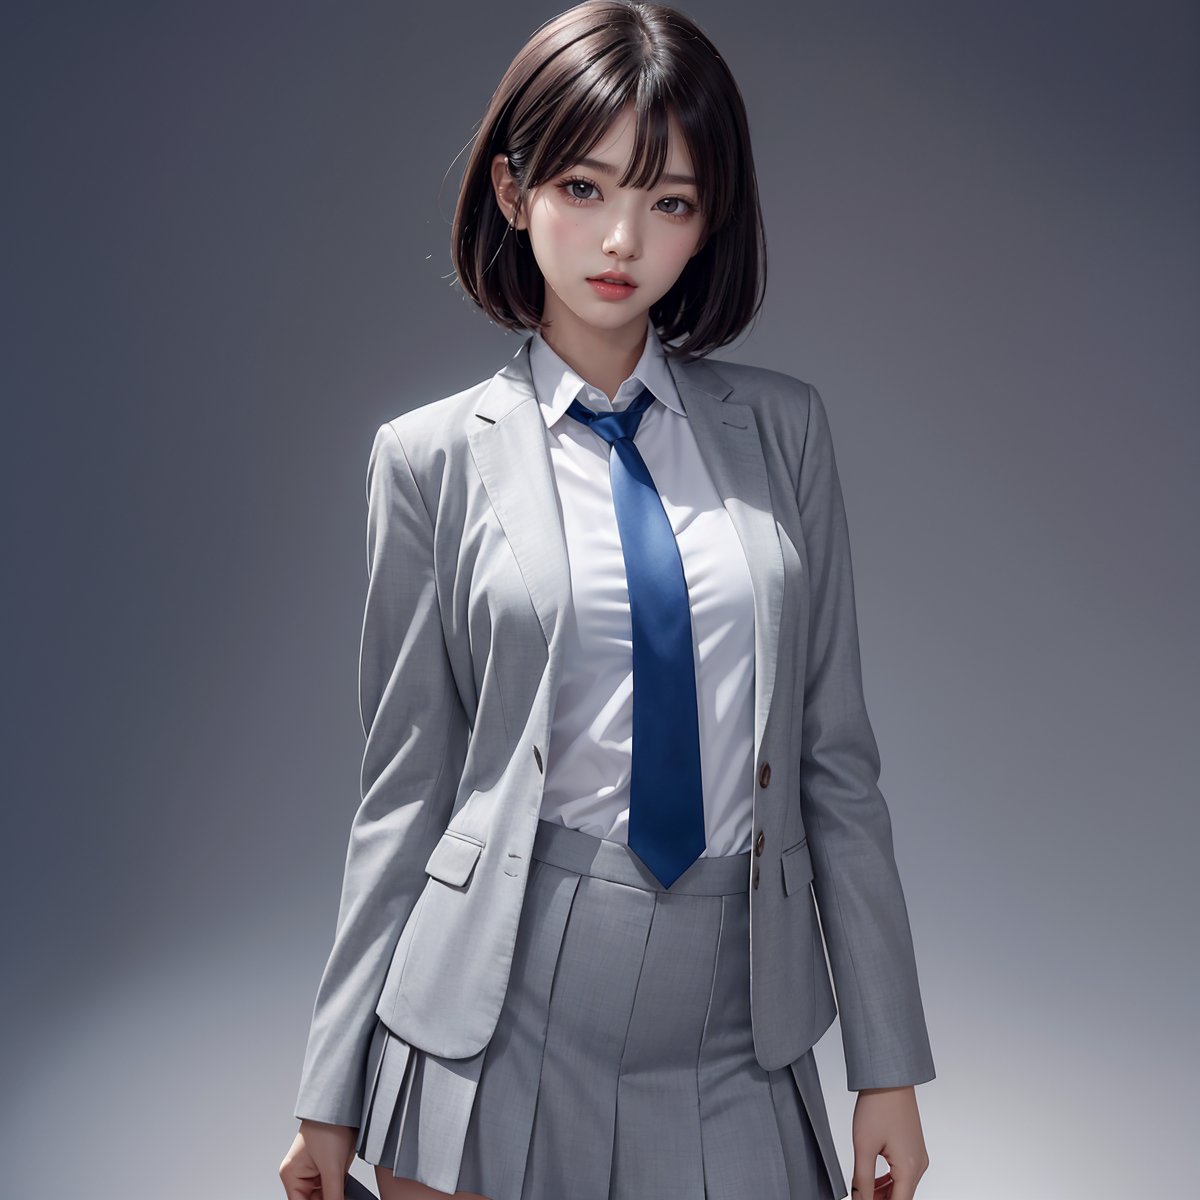 This captivating and visually stunning fractal art depicts a woman's entire body. The official art gives her a strong aesthetic appeal. 4K high resolution rendering. 19 year old Japanese female. Black, straight, short hair with bangs. Dark eyes, short eyelashes, small breasts. Standing posture.
Japanese high school uniform. Blazer type. Gray blazer, gray skirt, white collared shirt, blue tie. Full shot. white simple background.
1 girl. JAPANESE GIRL, akkoj